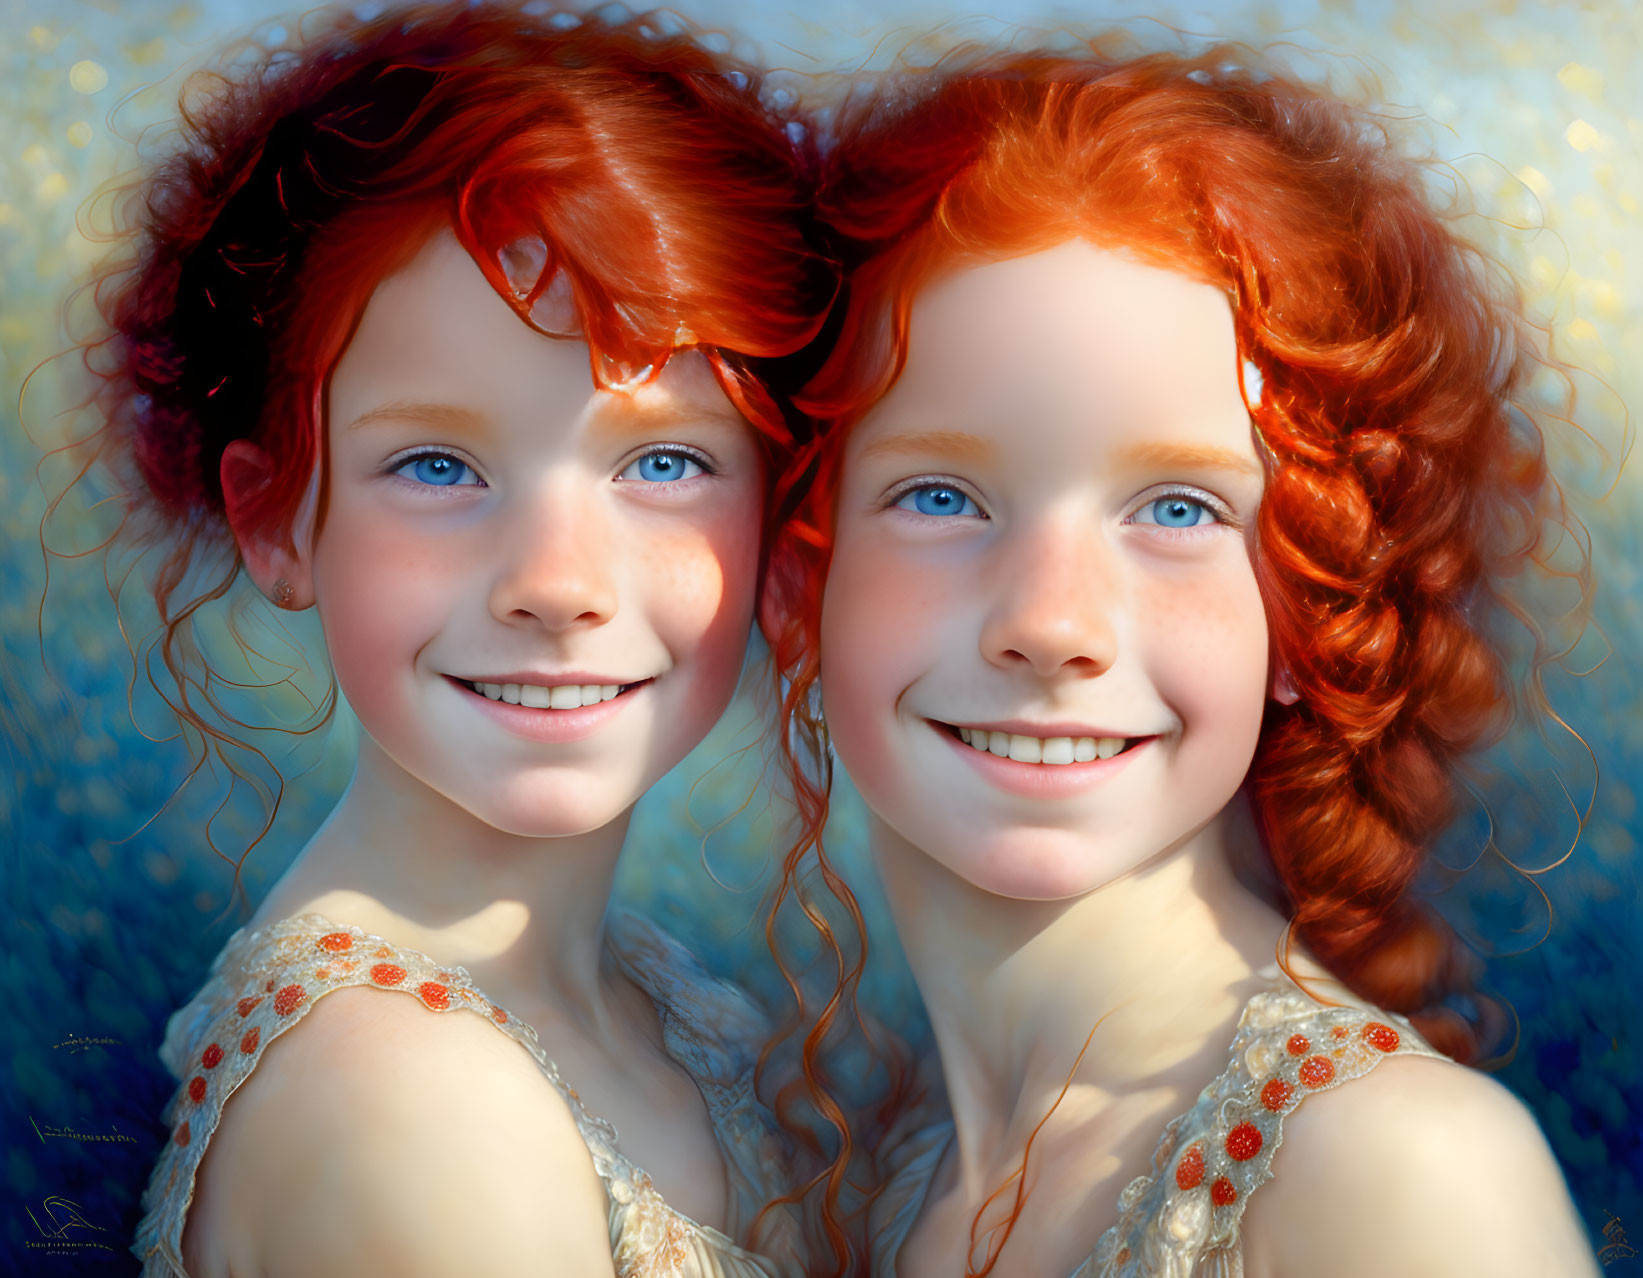 Two Smiling Girls with Red Curly Hair in Cream Outfits